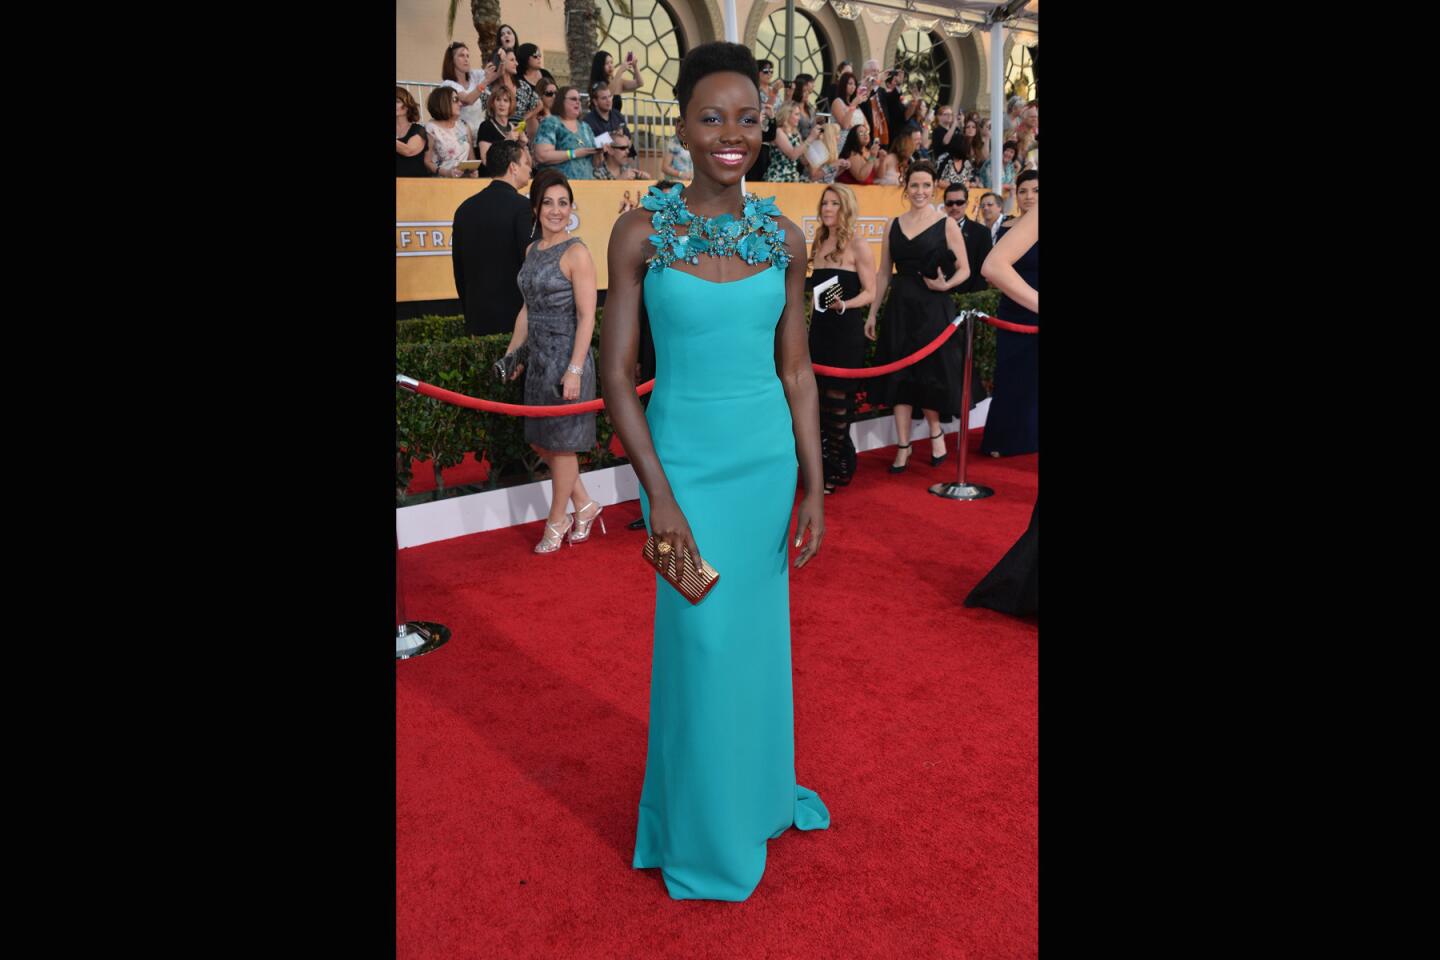 It's not exactly the jaw-dropping moment she had at the Golden Globes, but it's still pretty fabulous. What makes Nyong'o's Gucci turquoise silk column stand out is the floral detail at the neckline. Who needs jewelry?